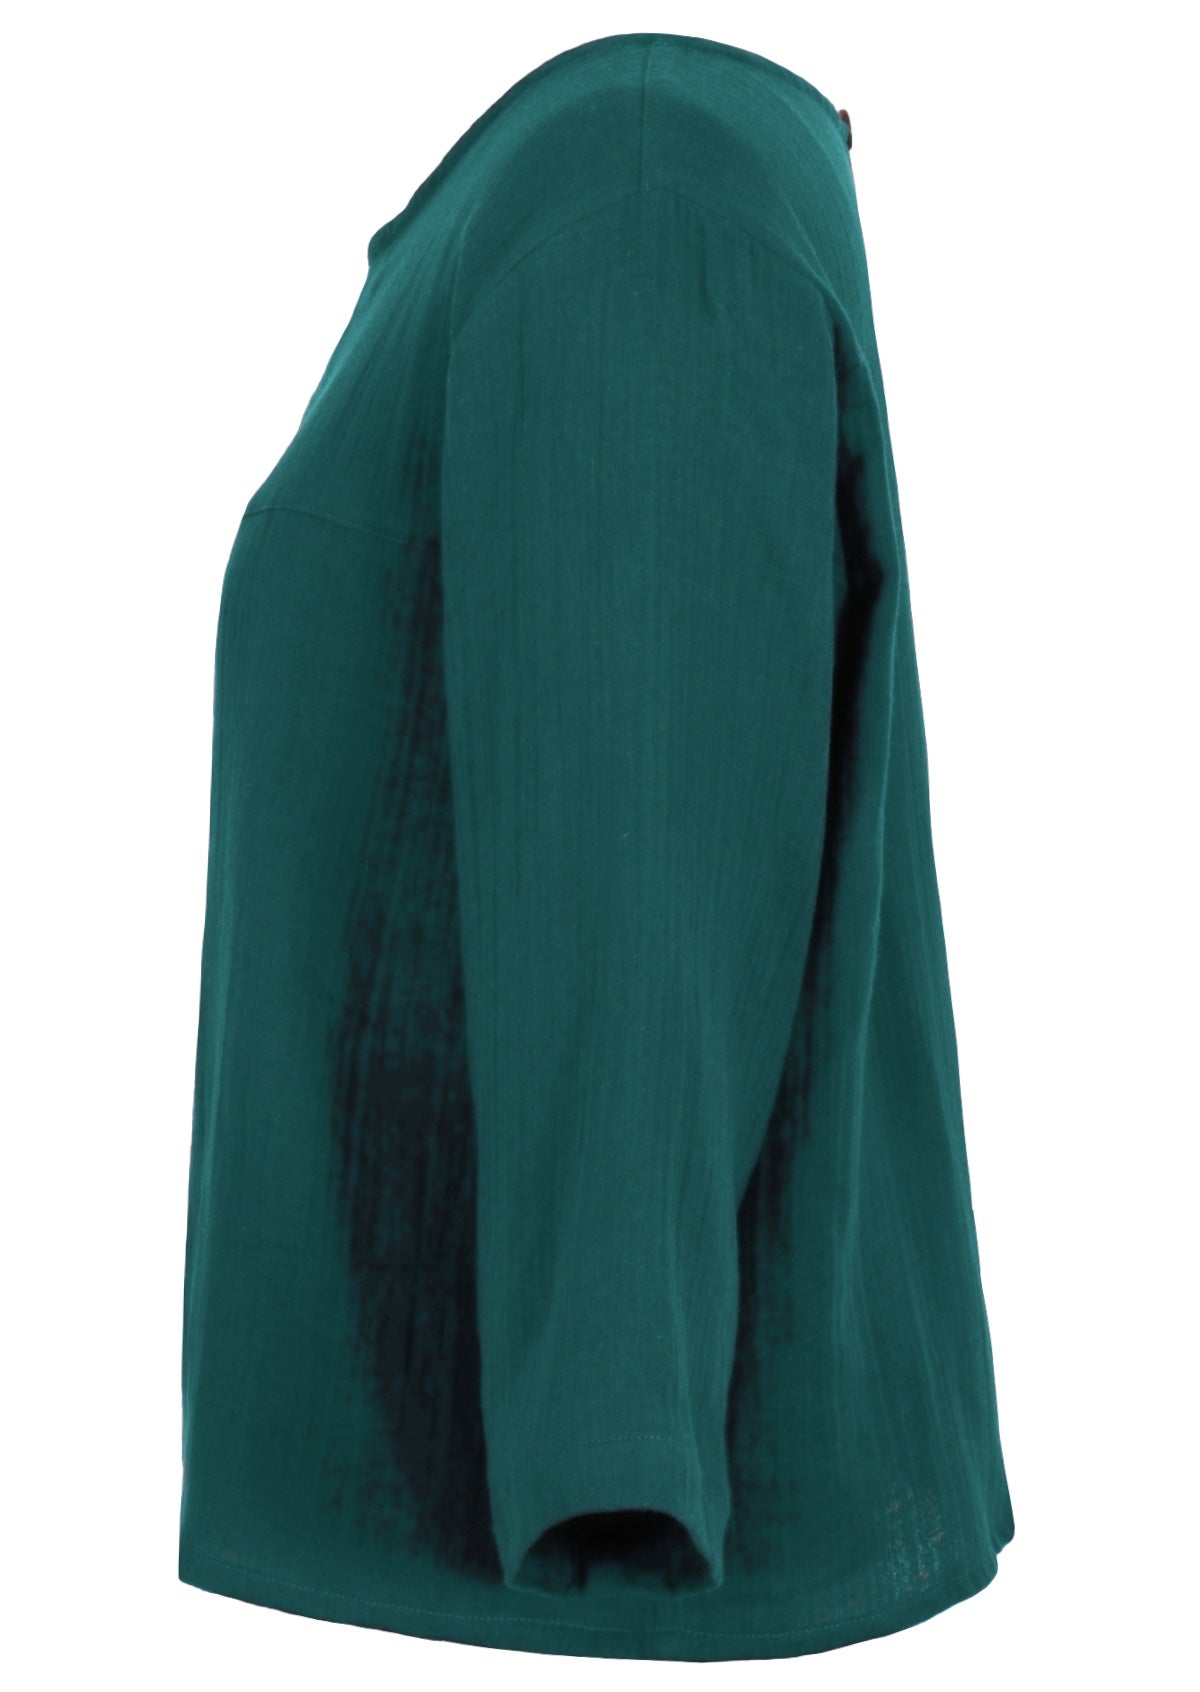 Deep teal top made from two layers of lightweight cotton gauze